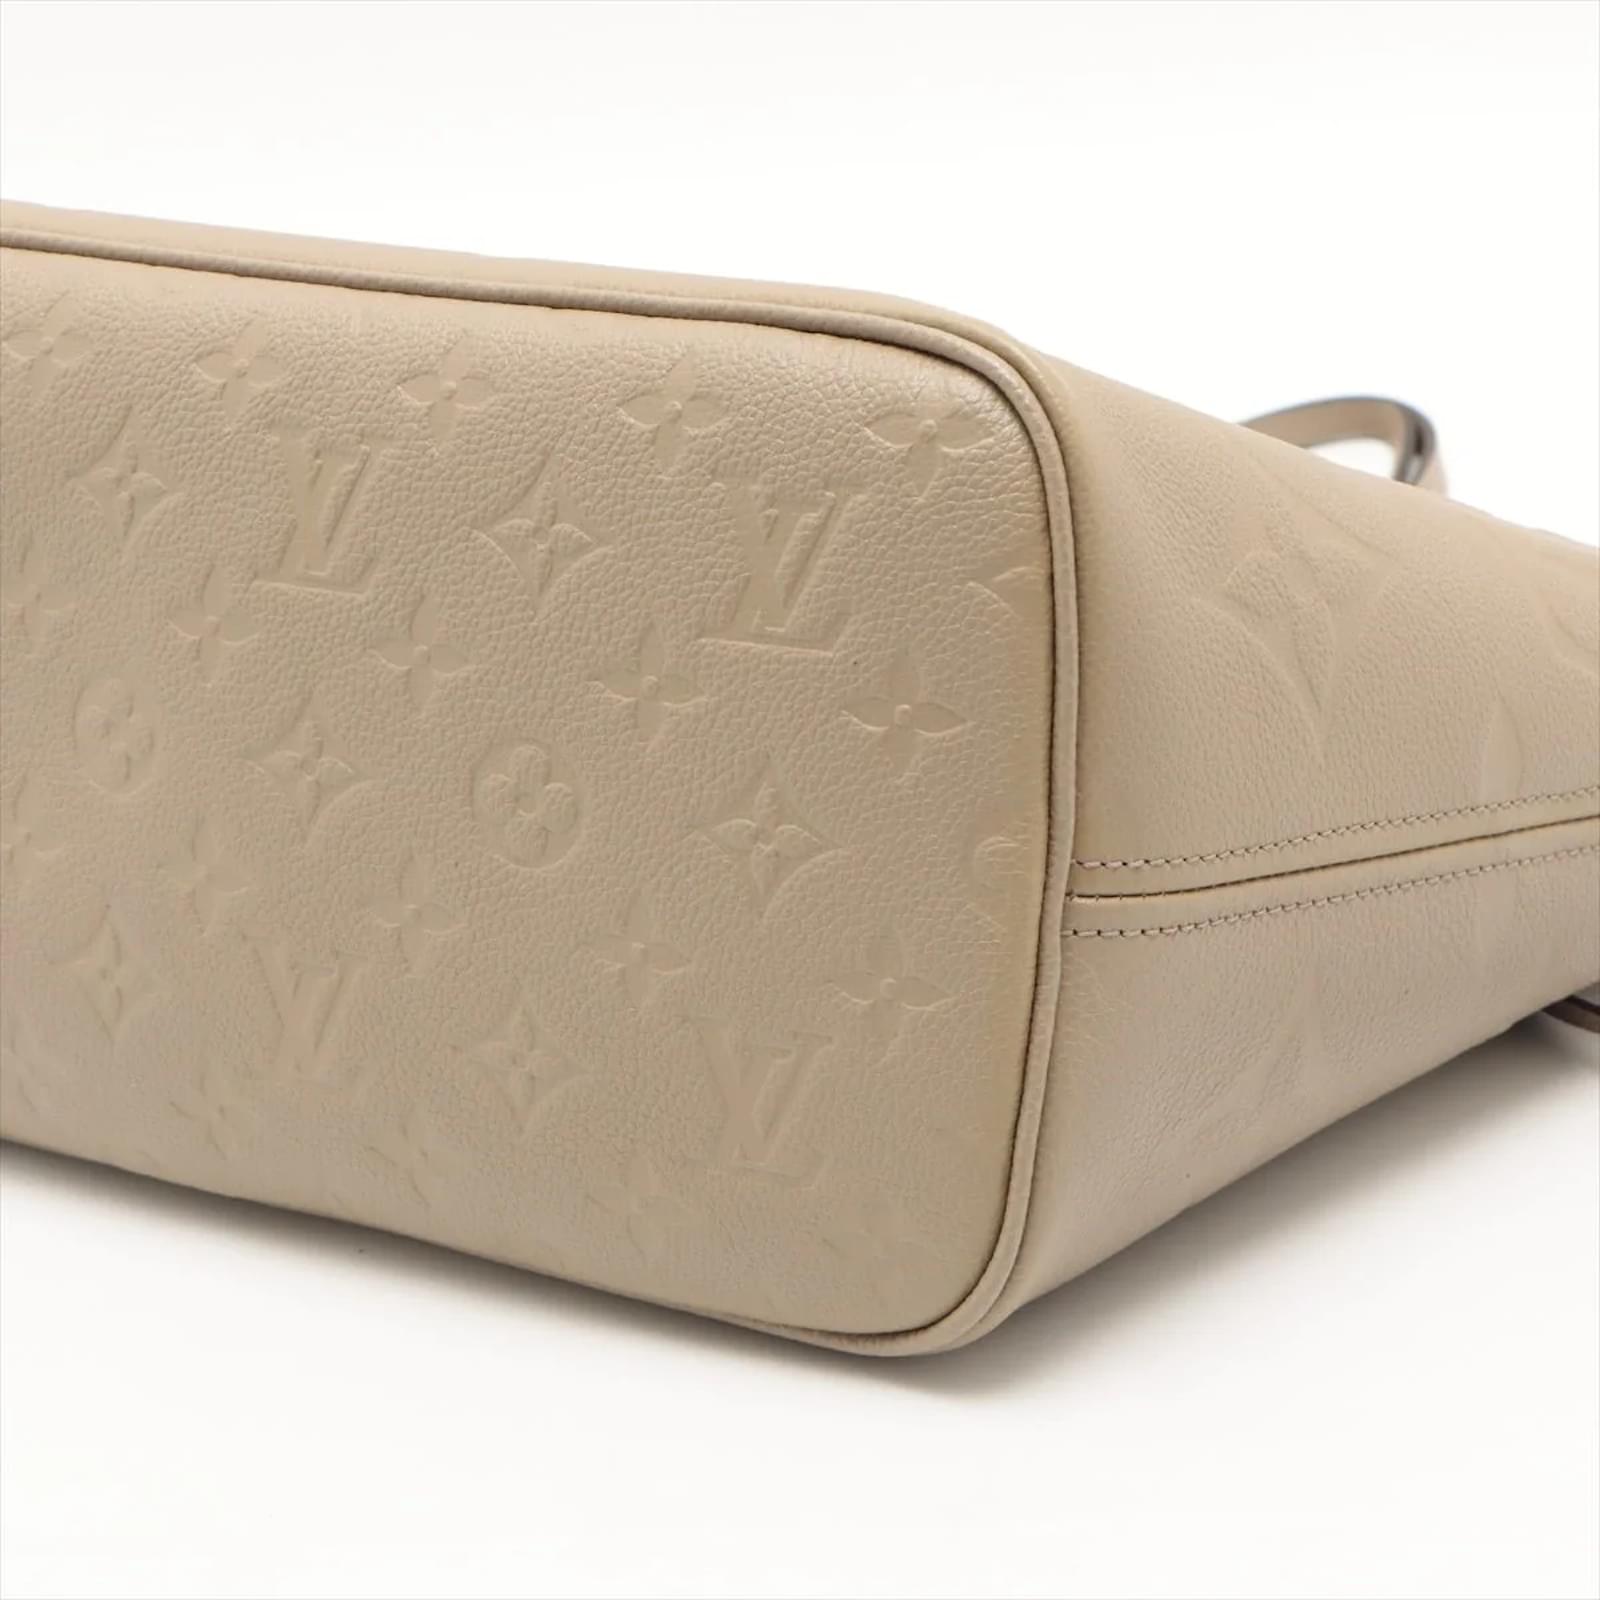 Louis Vuitton Neverfull Empreinte MM Turtledove in Leather with